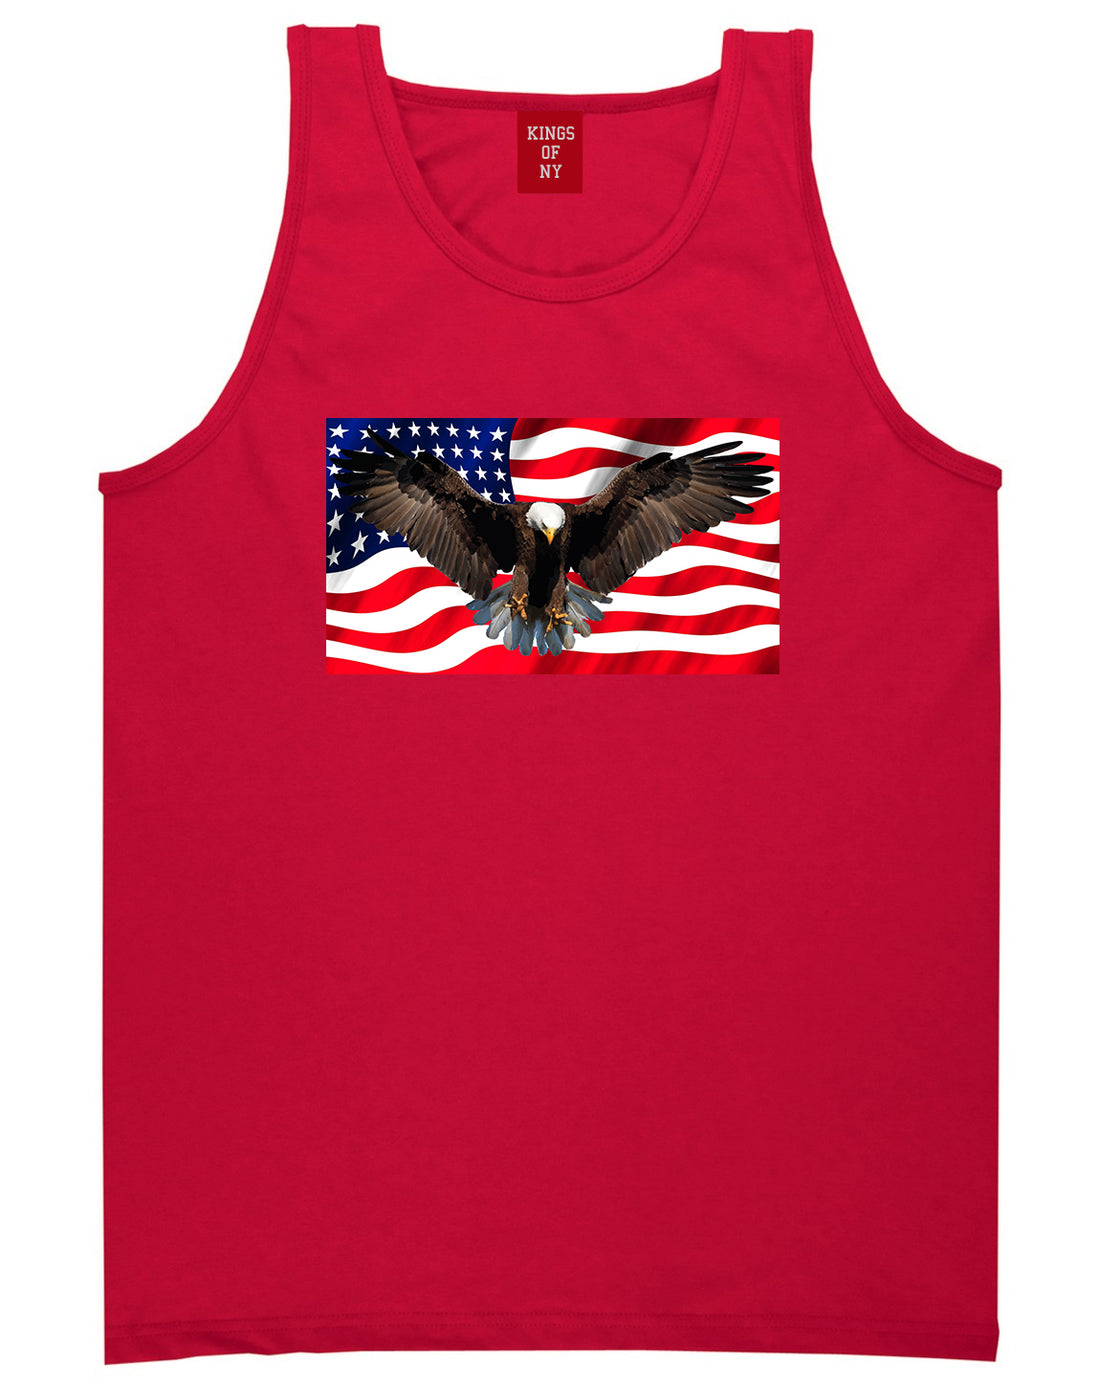 Bald Eagle American Flag Red Tank Top Shirt by Kings Of NY